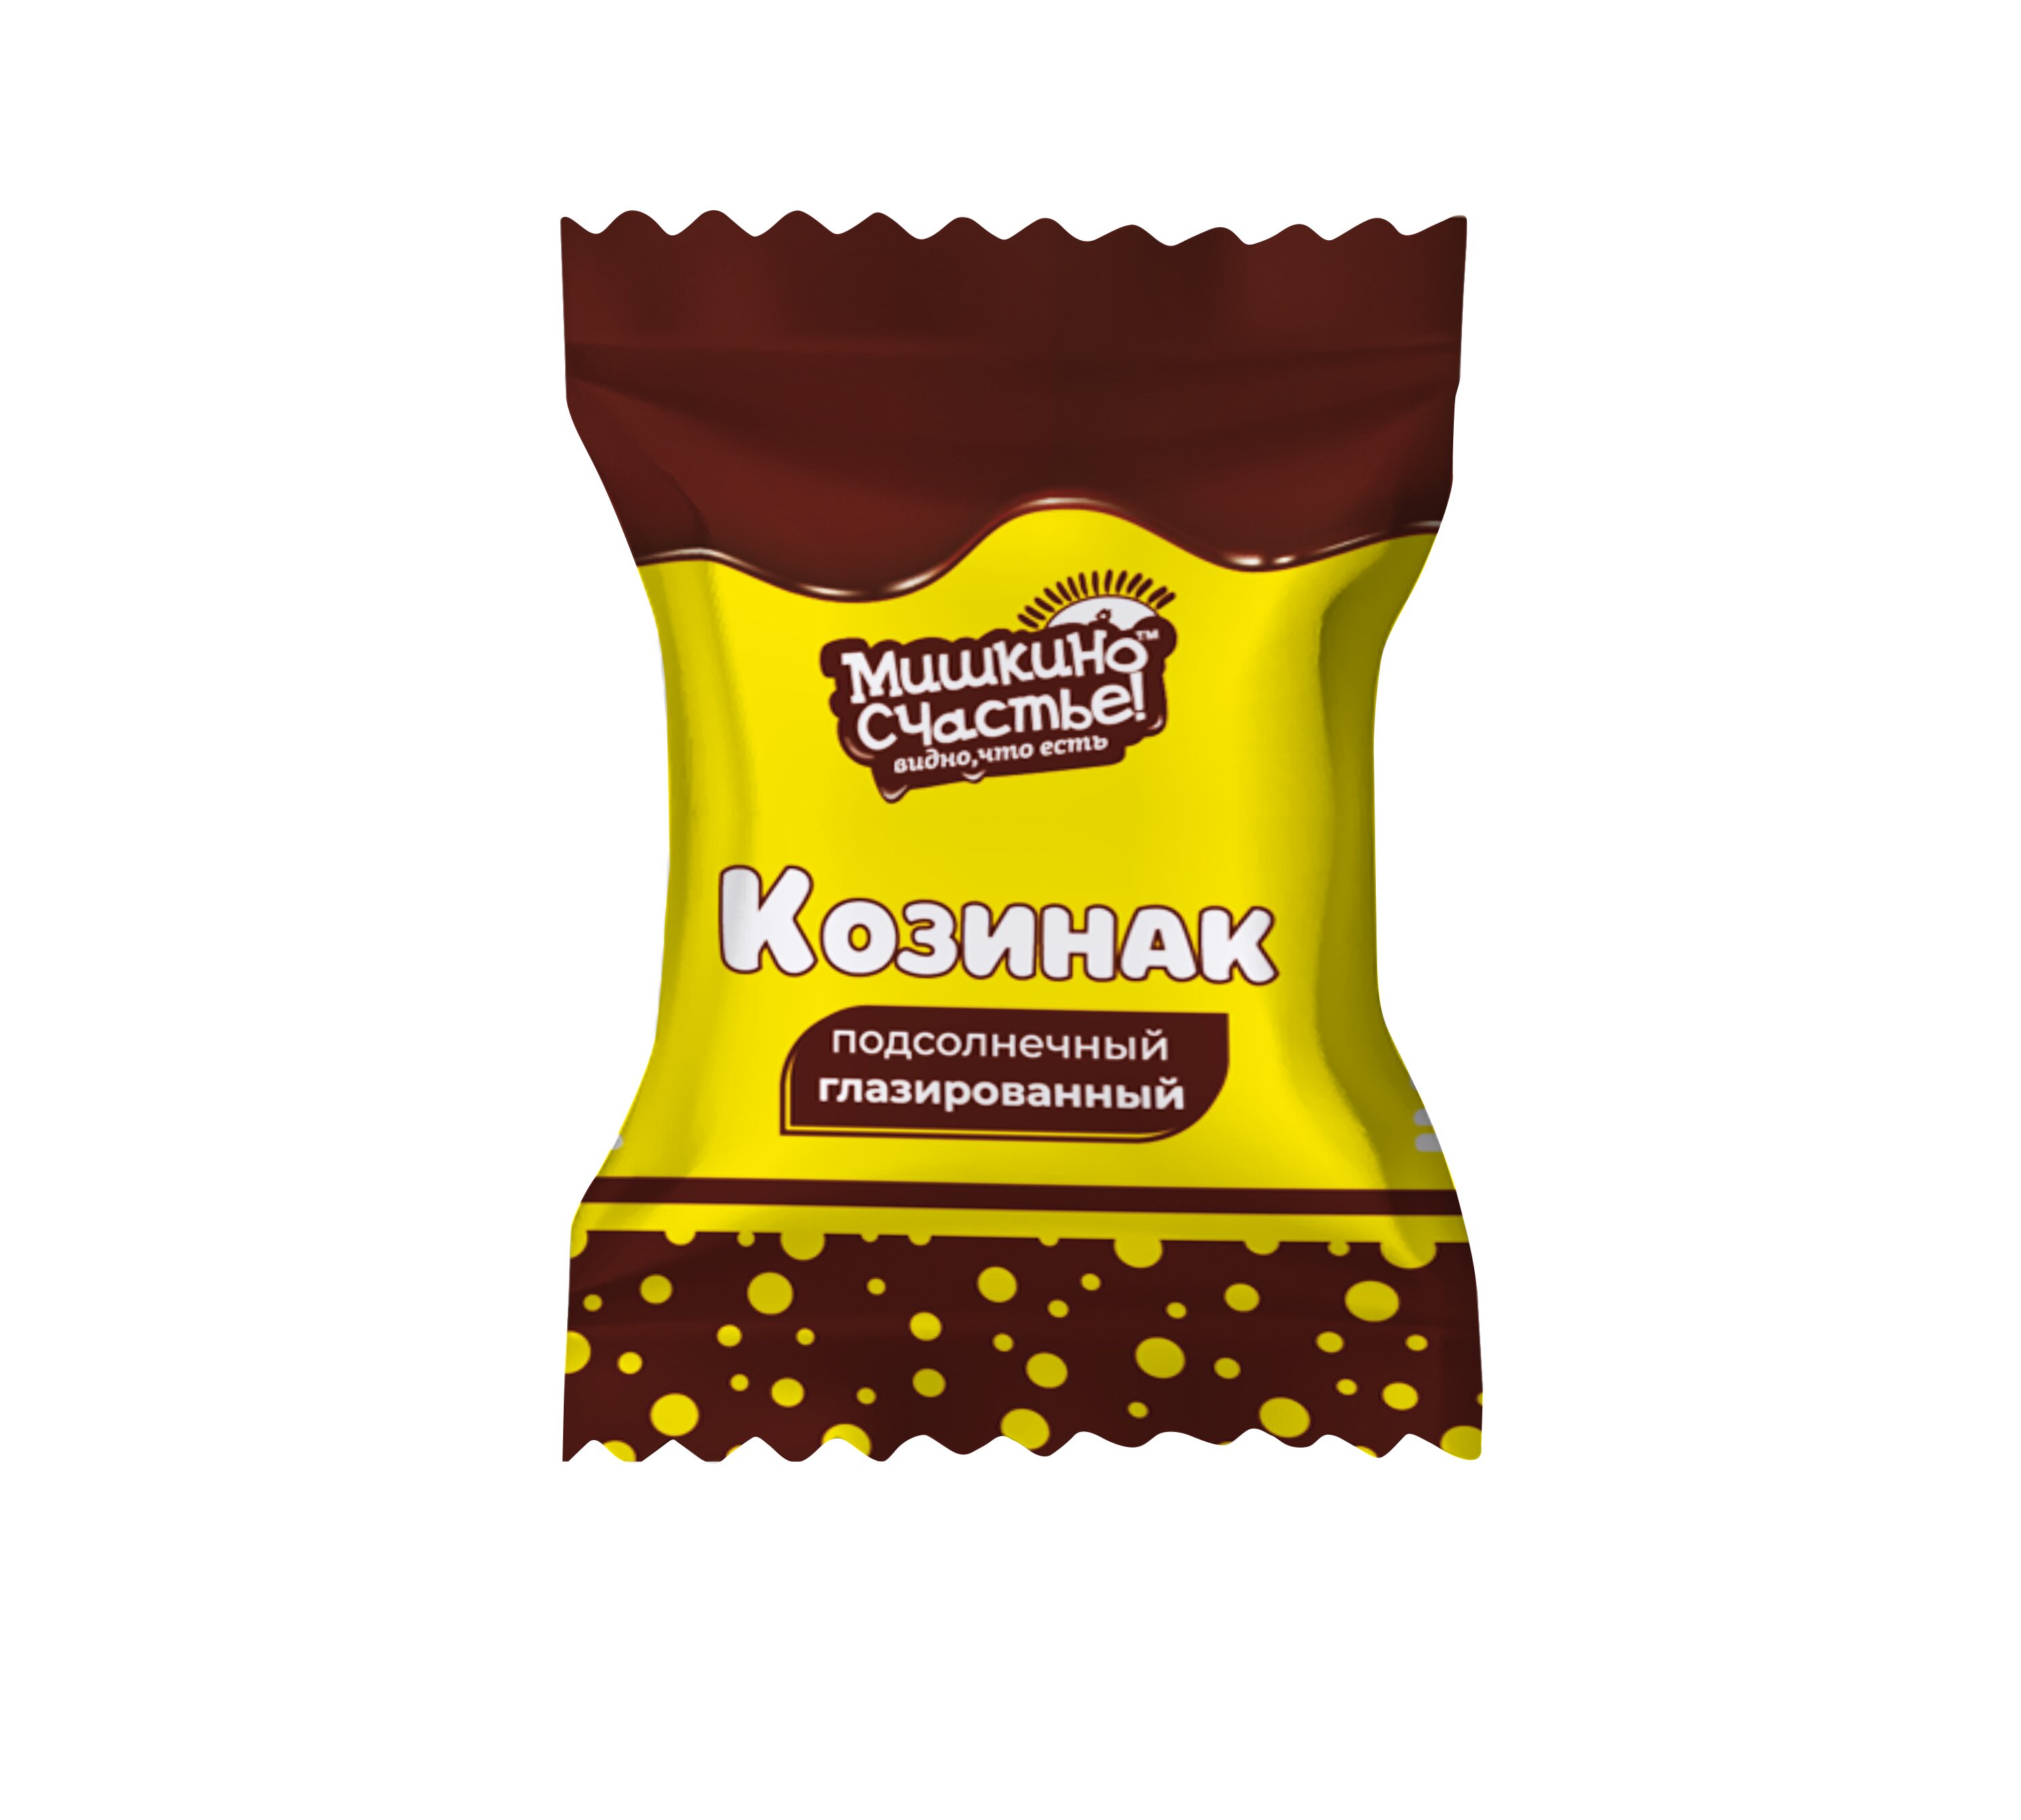 Sunflower brittle sweets covered with glaze "Mishkino happiness" 3 kg., 3 kg.